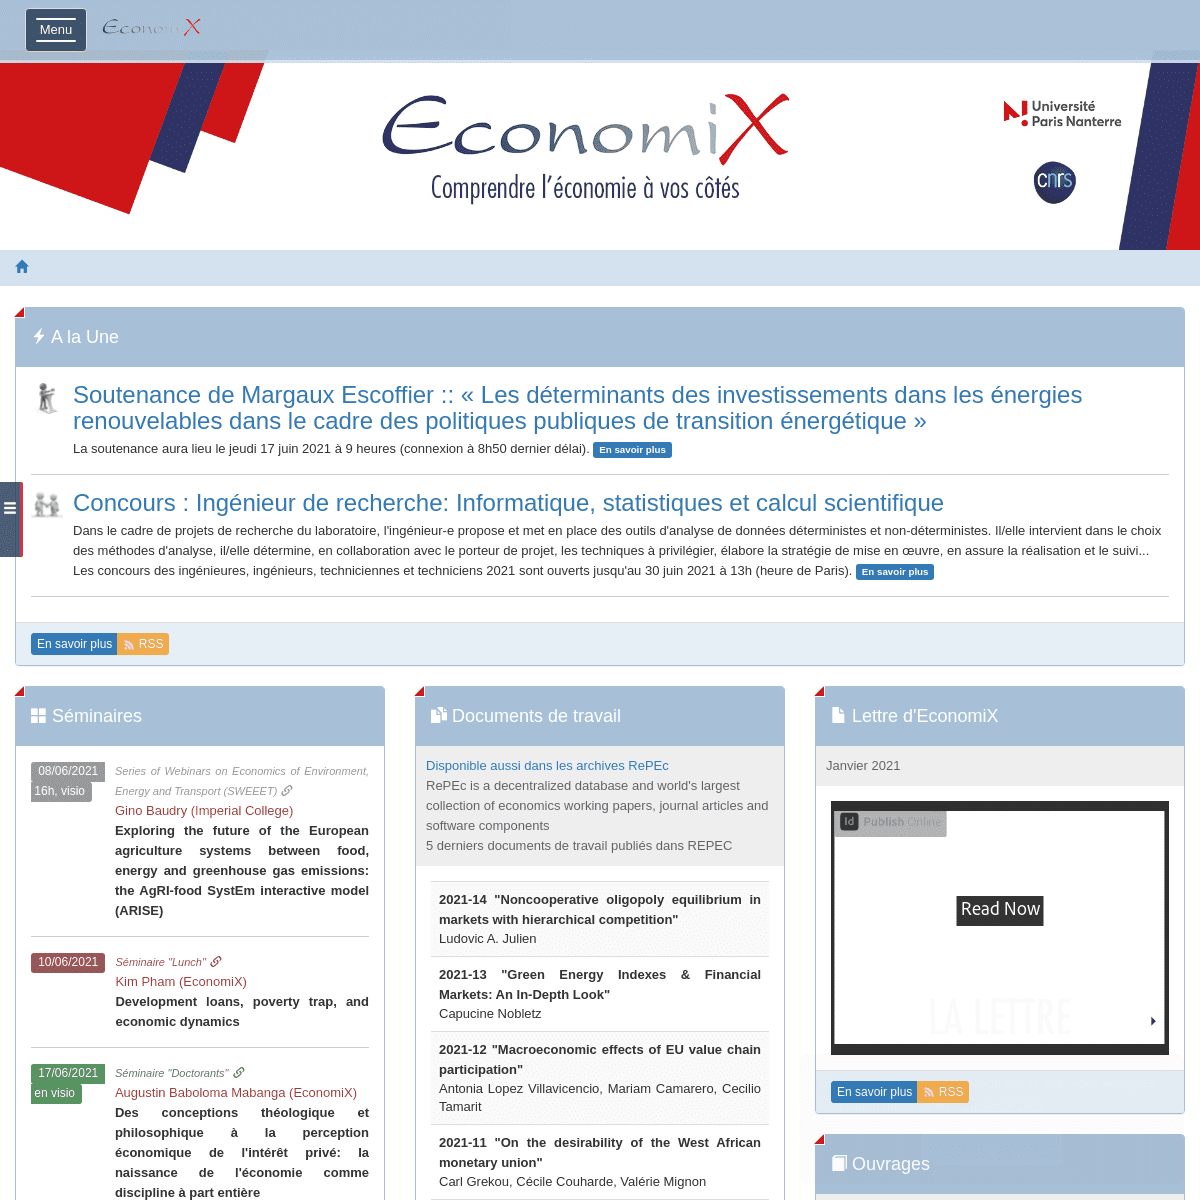 A complete backup of https://economix.fr